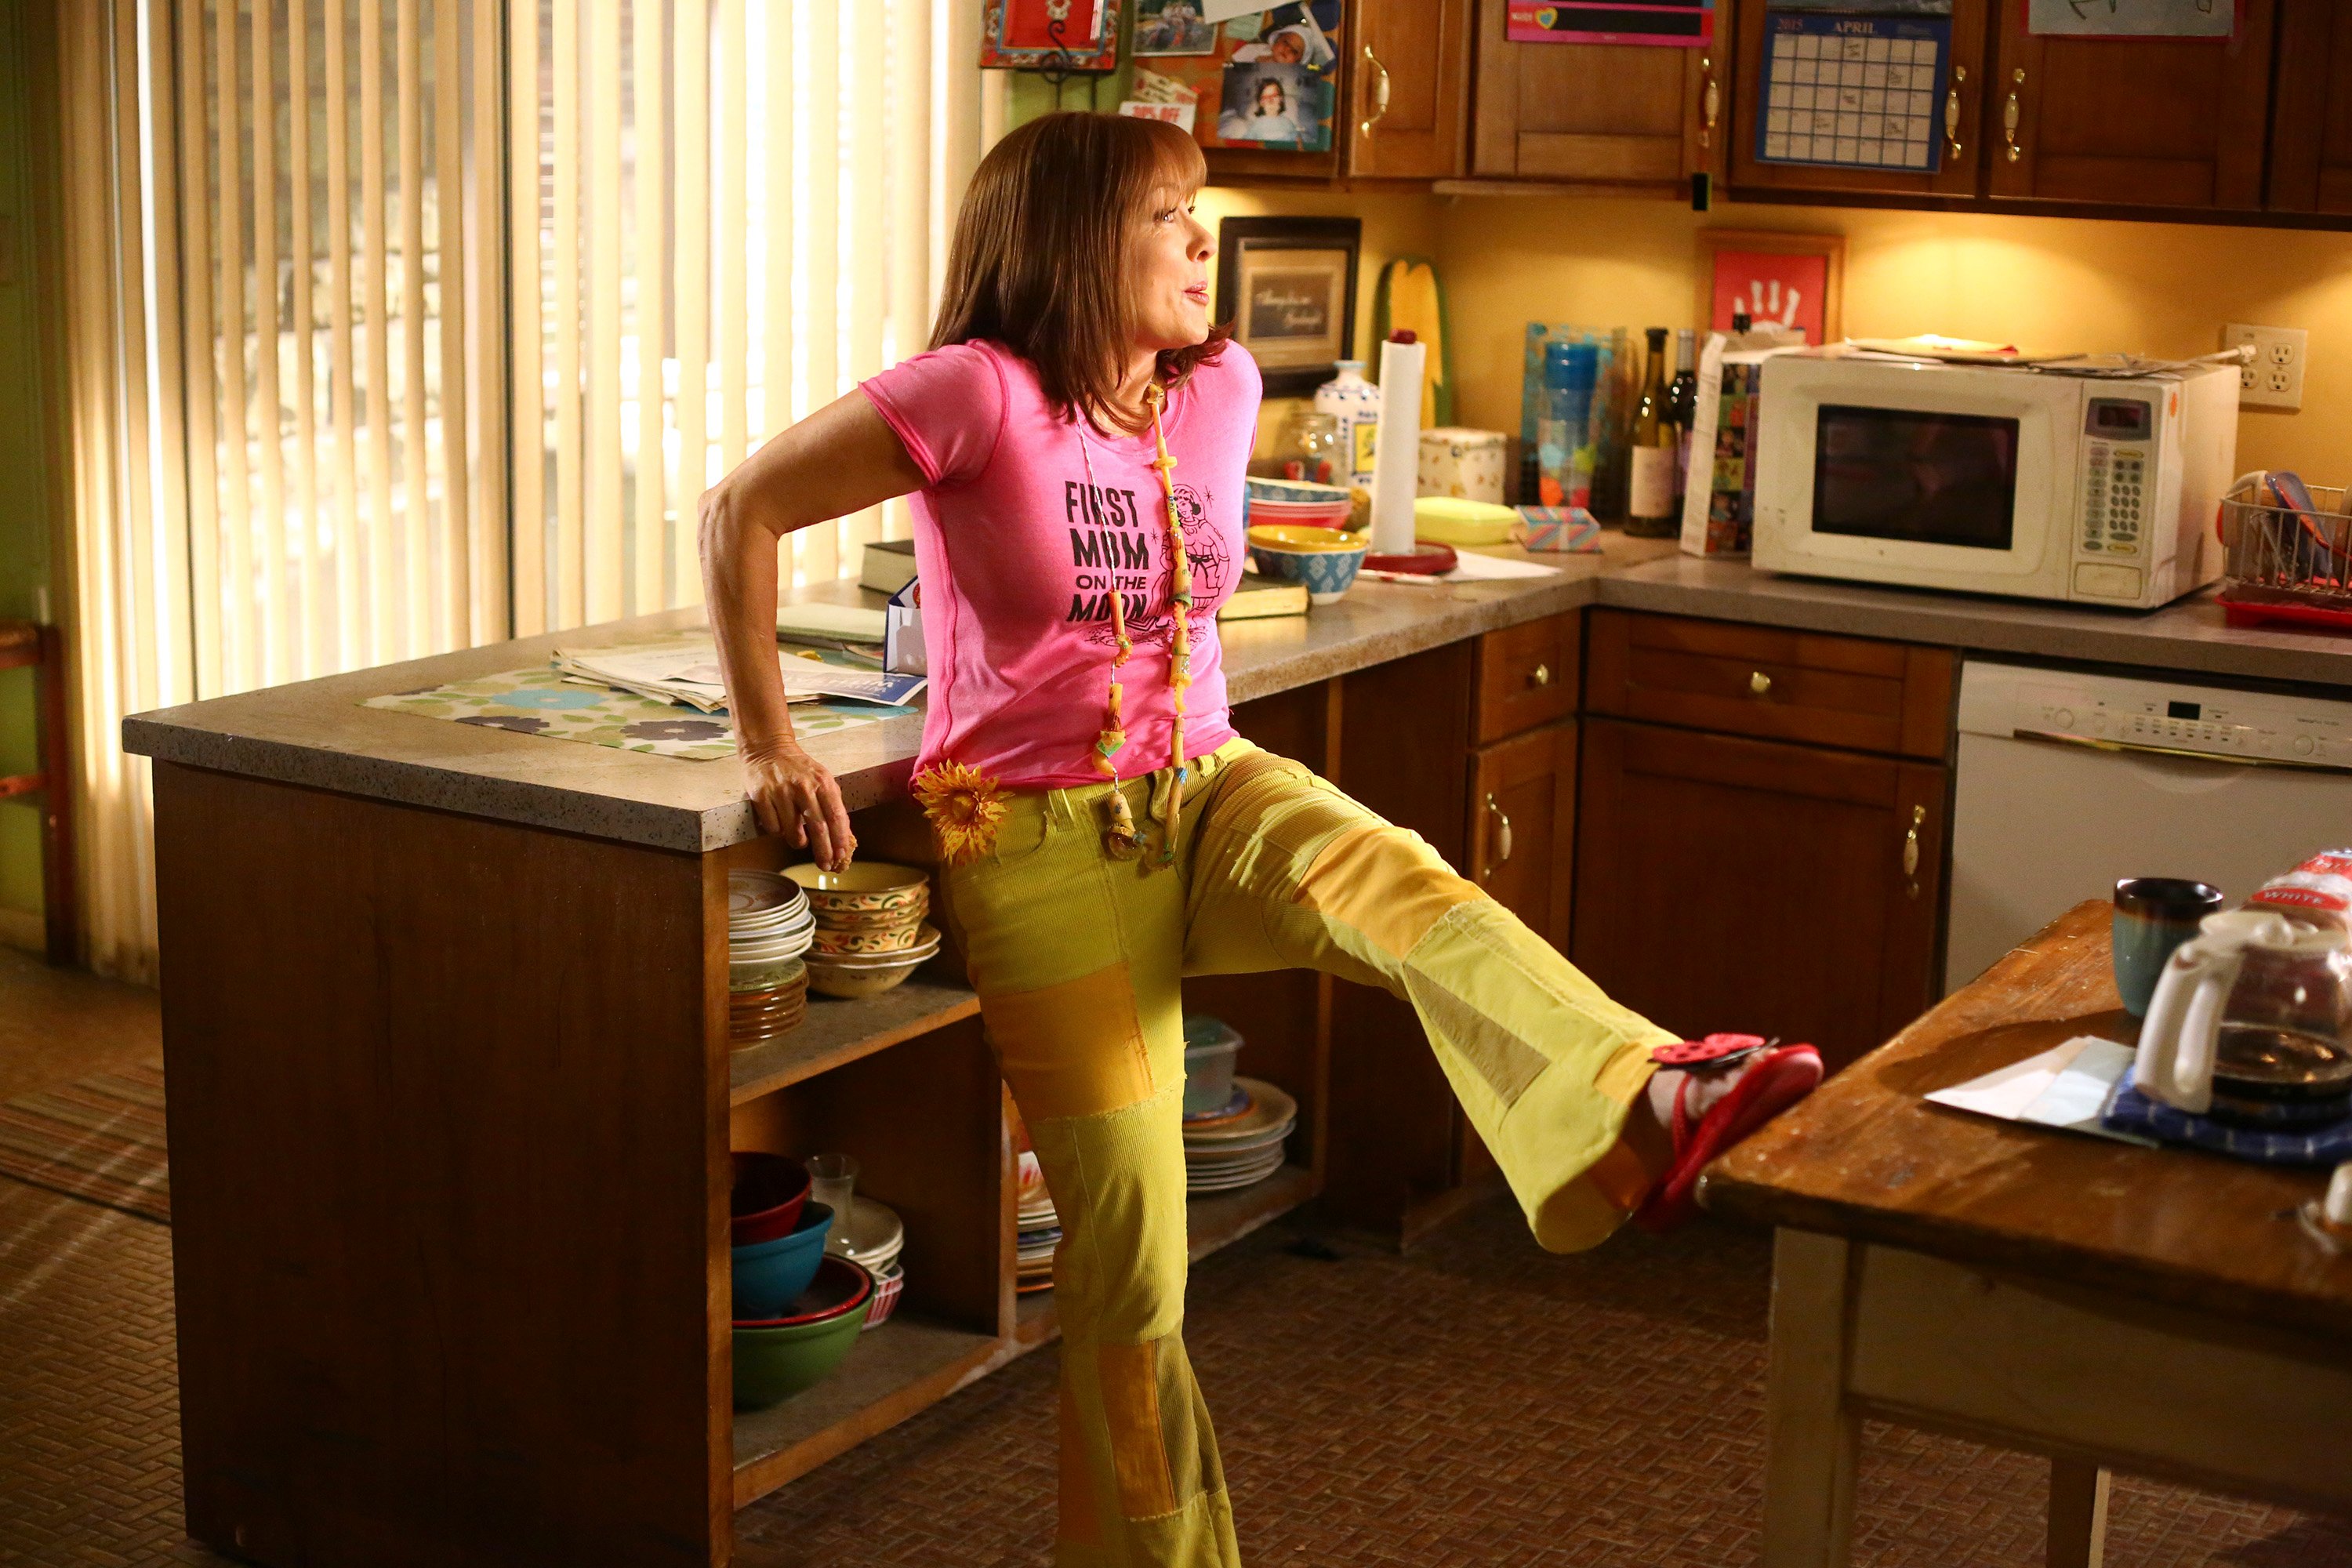 Actor Patricia Heaton shows off her foot in a scene from the ABC comedy 'The Middle'